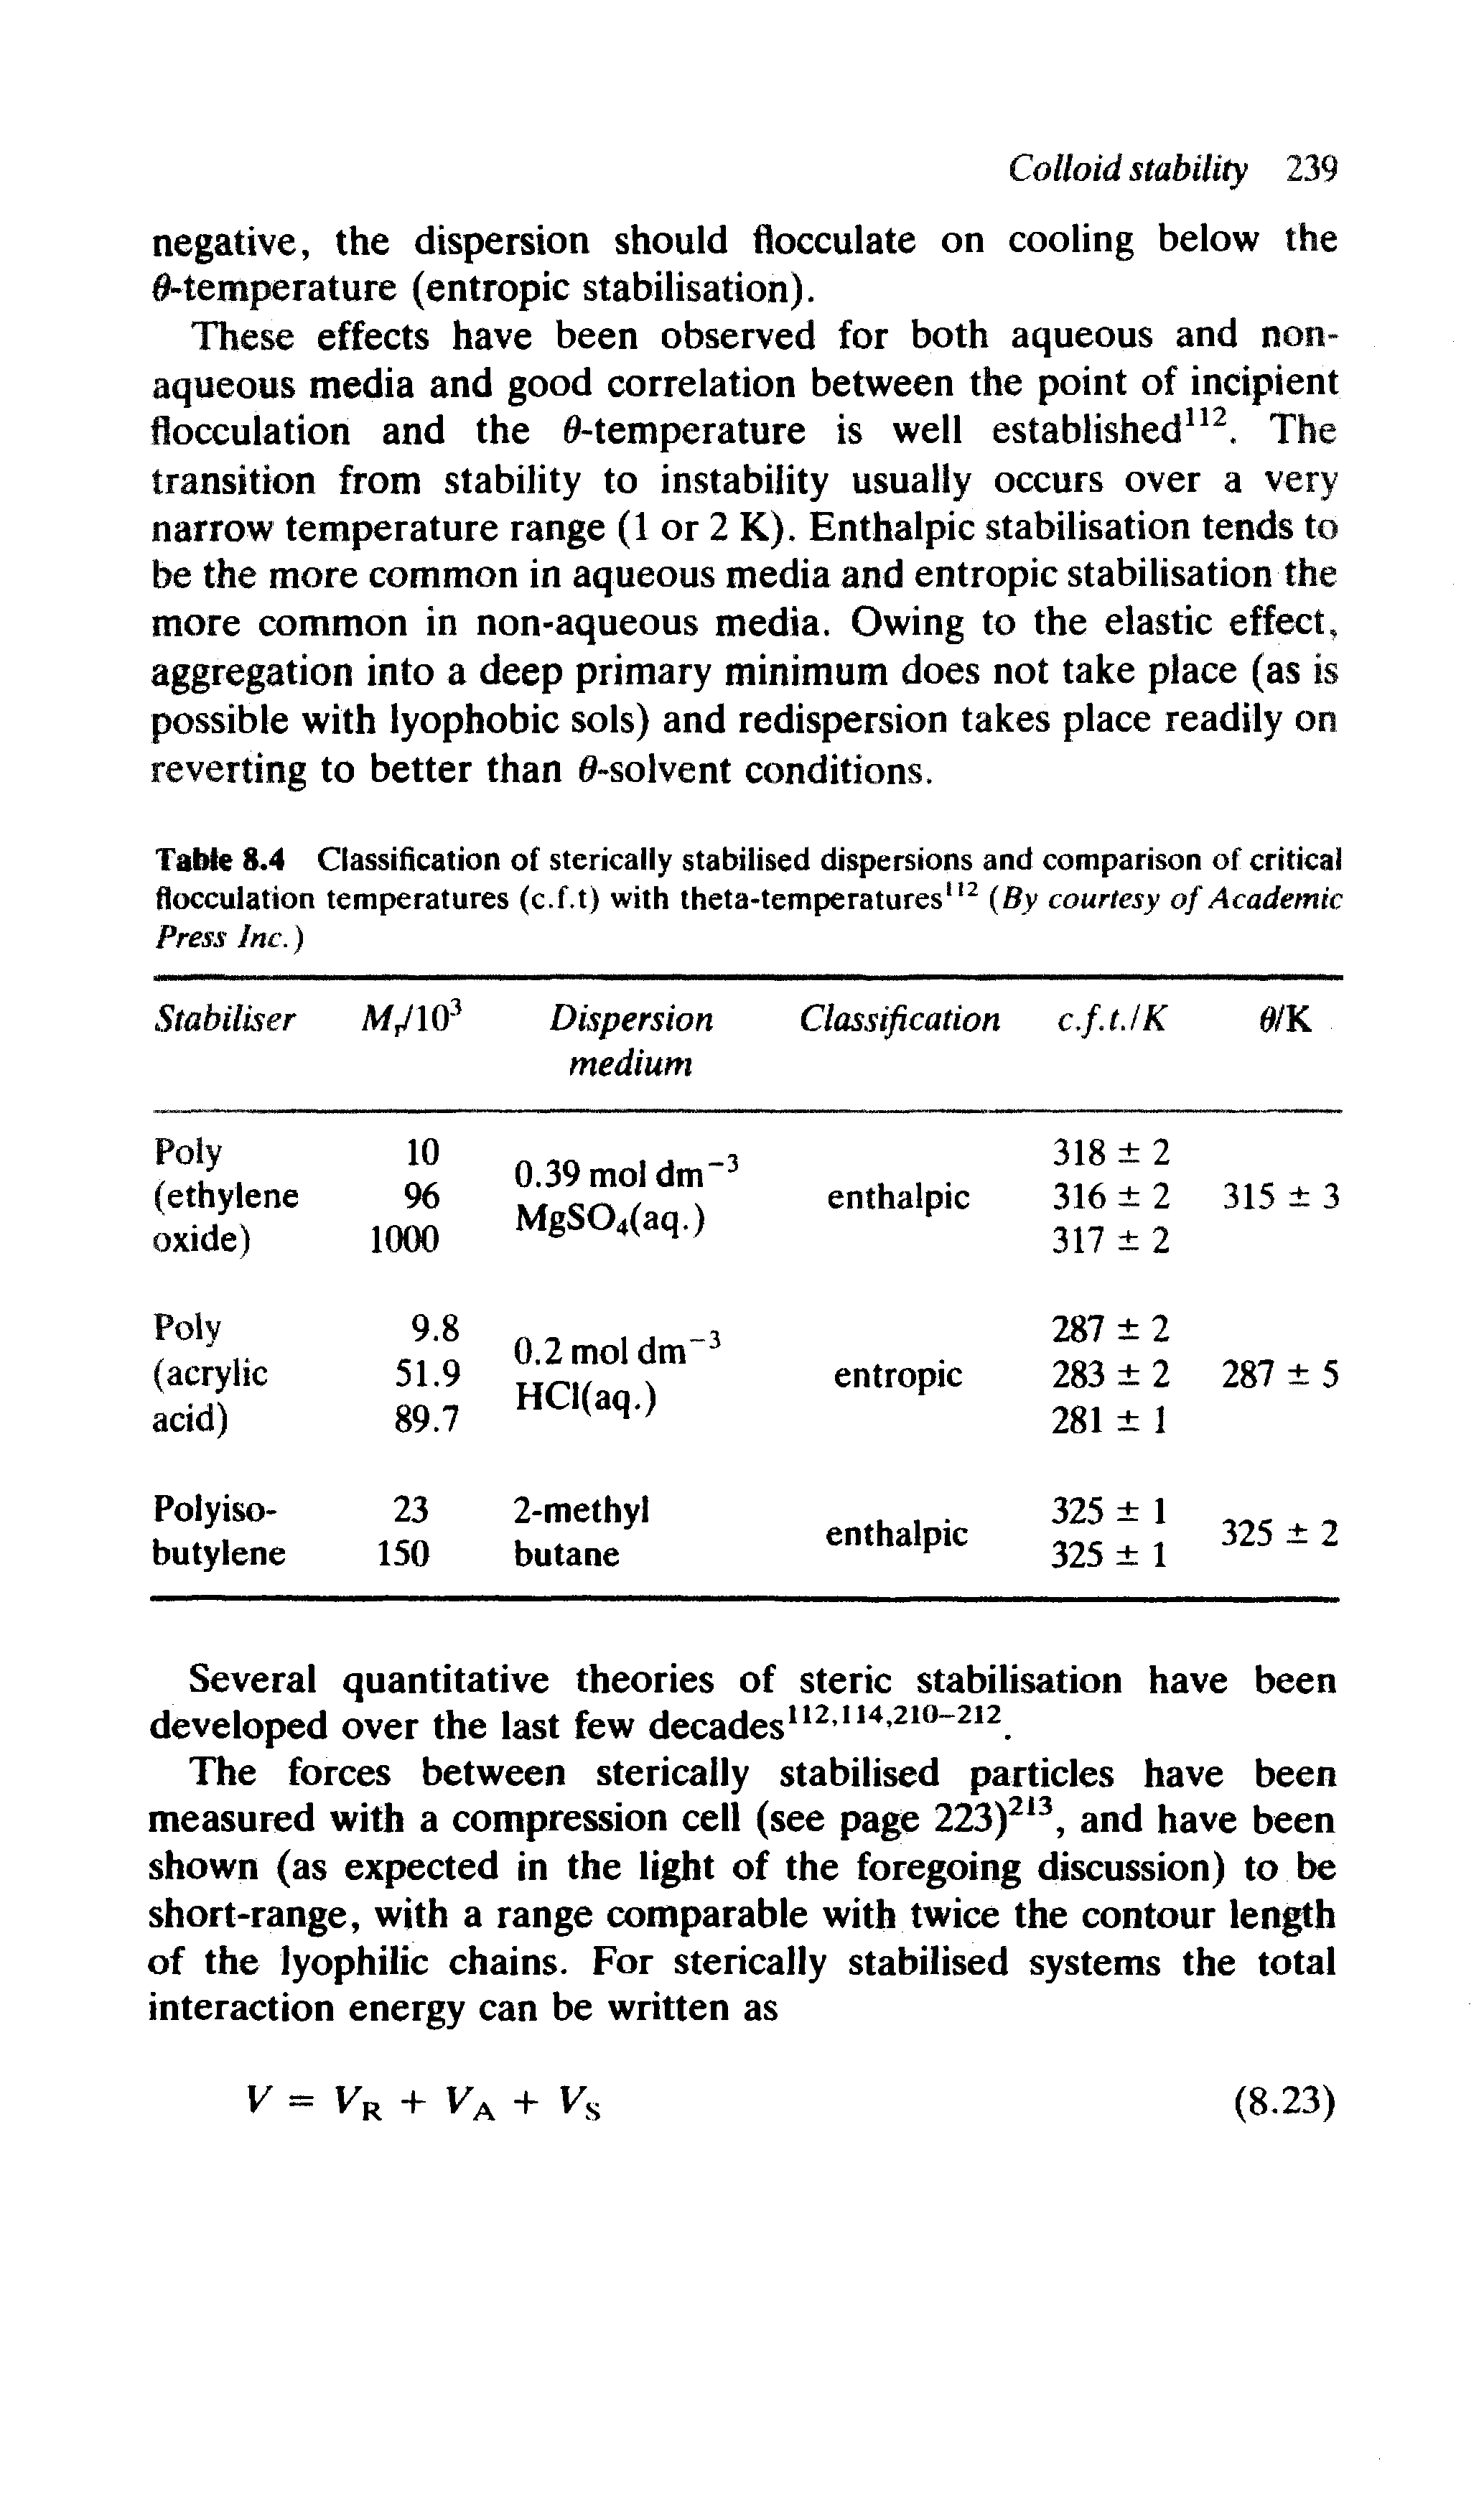 Table 8.4 Classification of sterically stabilised dispersions and comparison of critical flocculation temperatures (c.f.t) with theta-temperatures112 (By courtesy of Academic Press Inc.)...